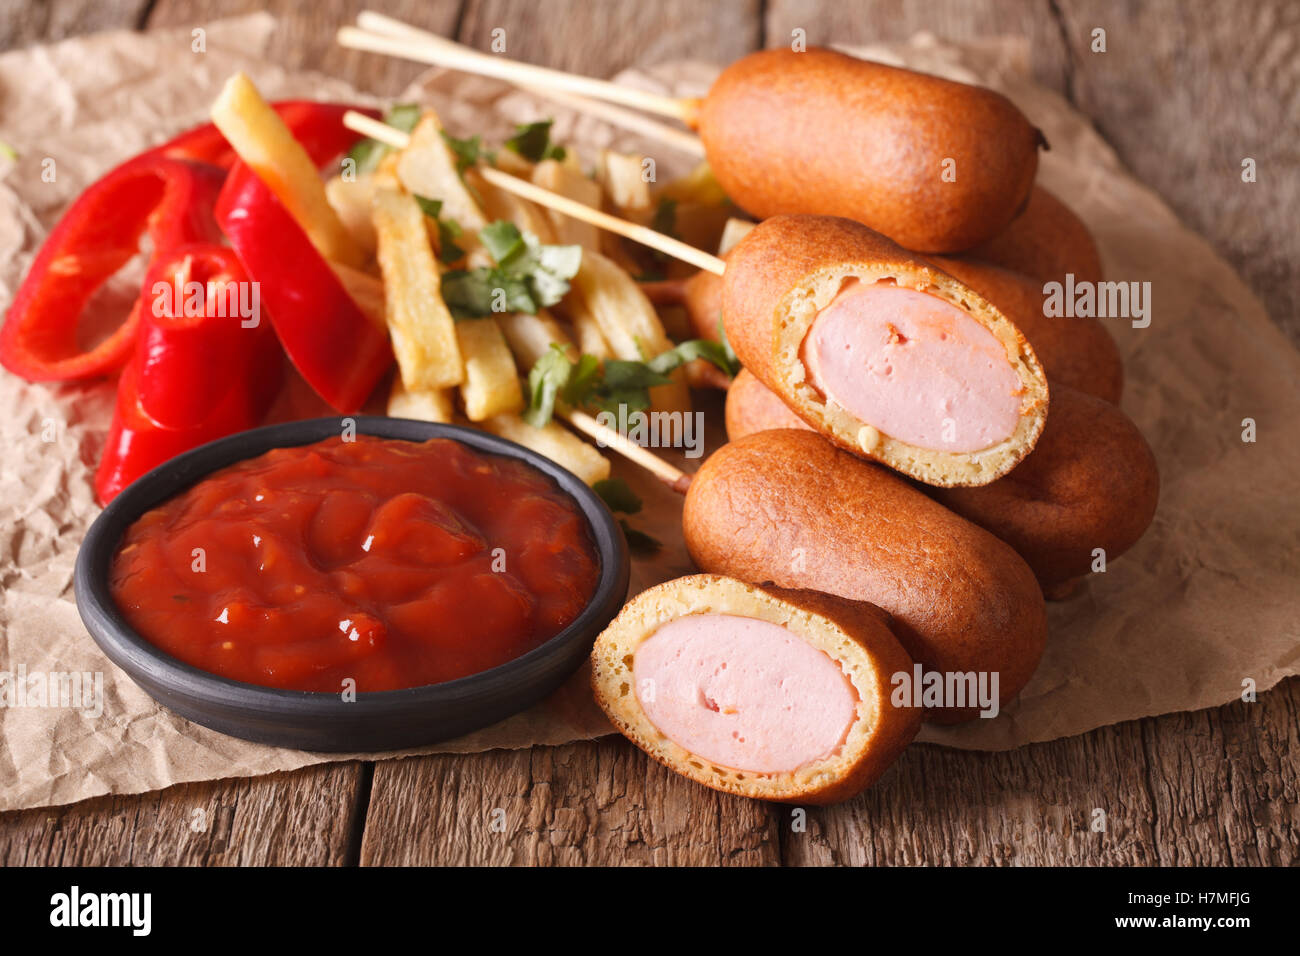 Fast food: corn dog, french fries and ketchup on the table close-up. horizontal Stock Photo